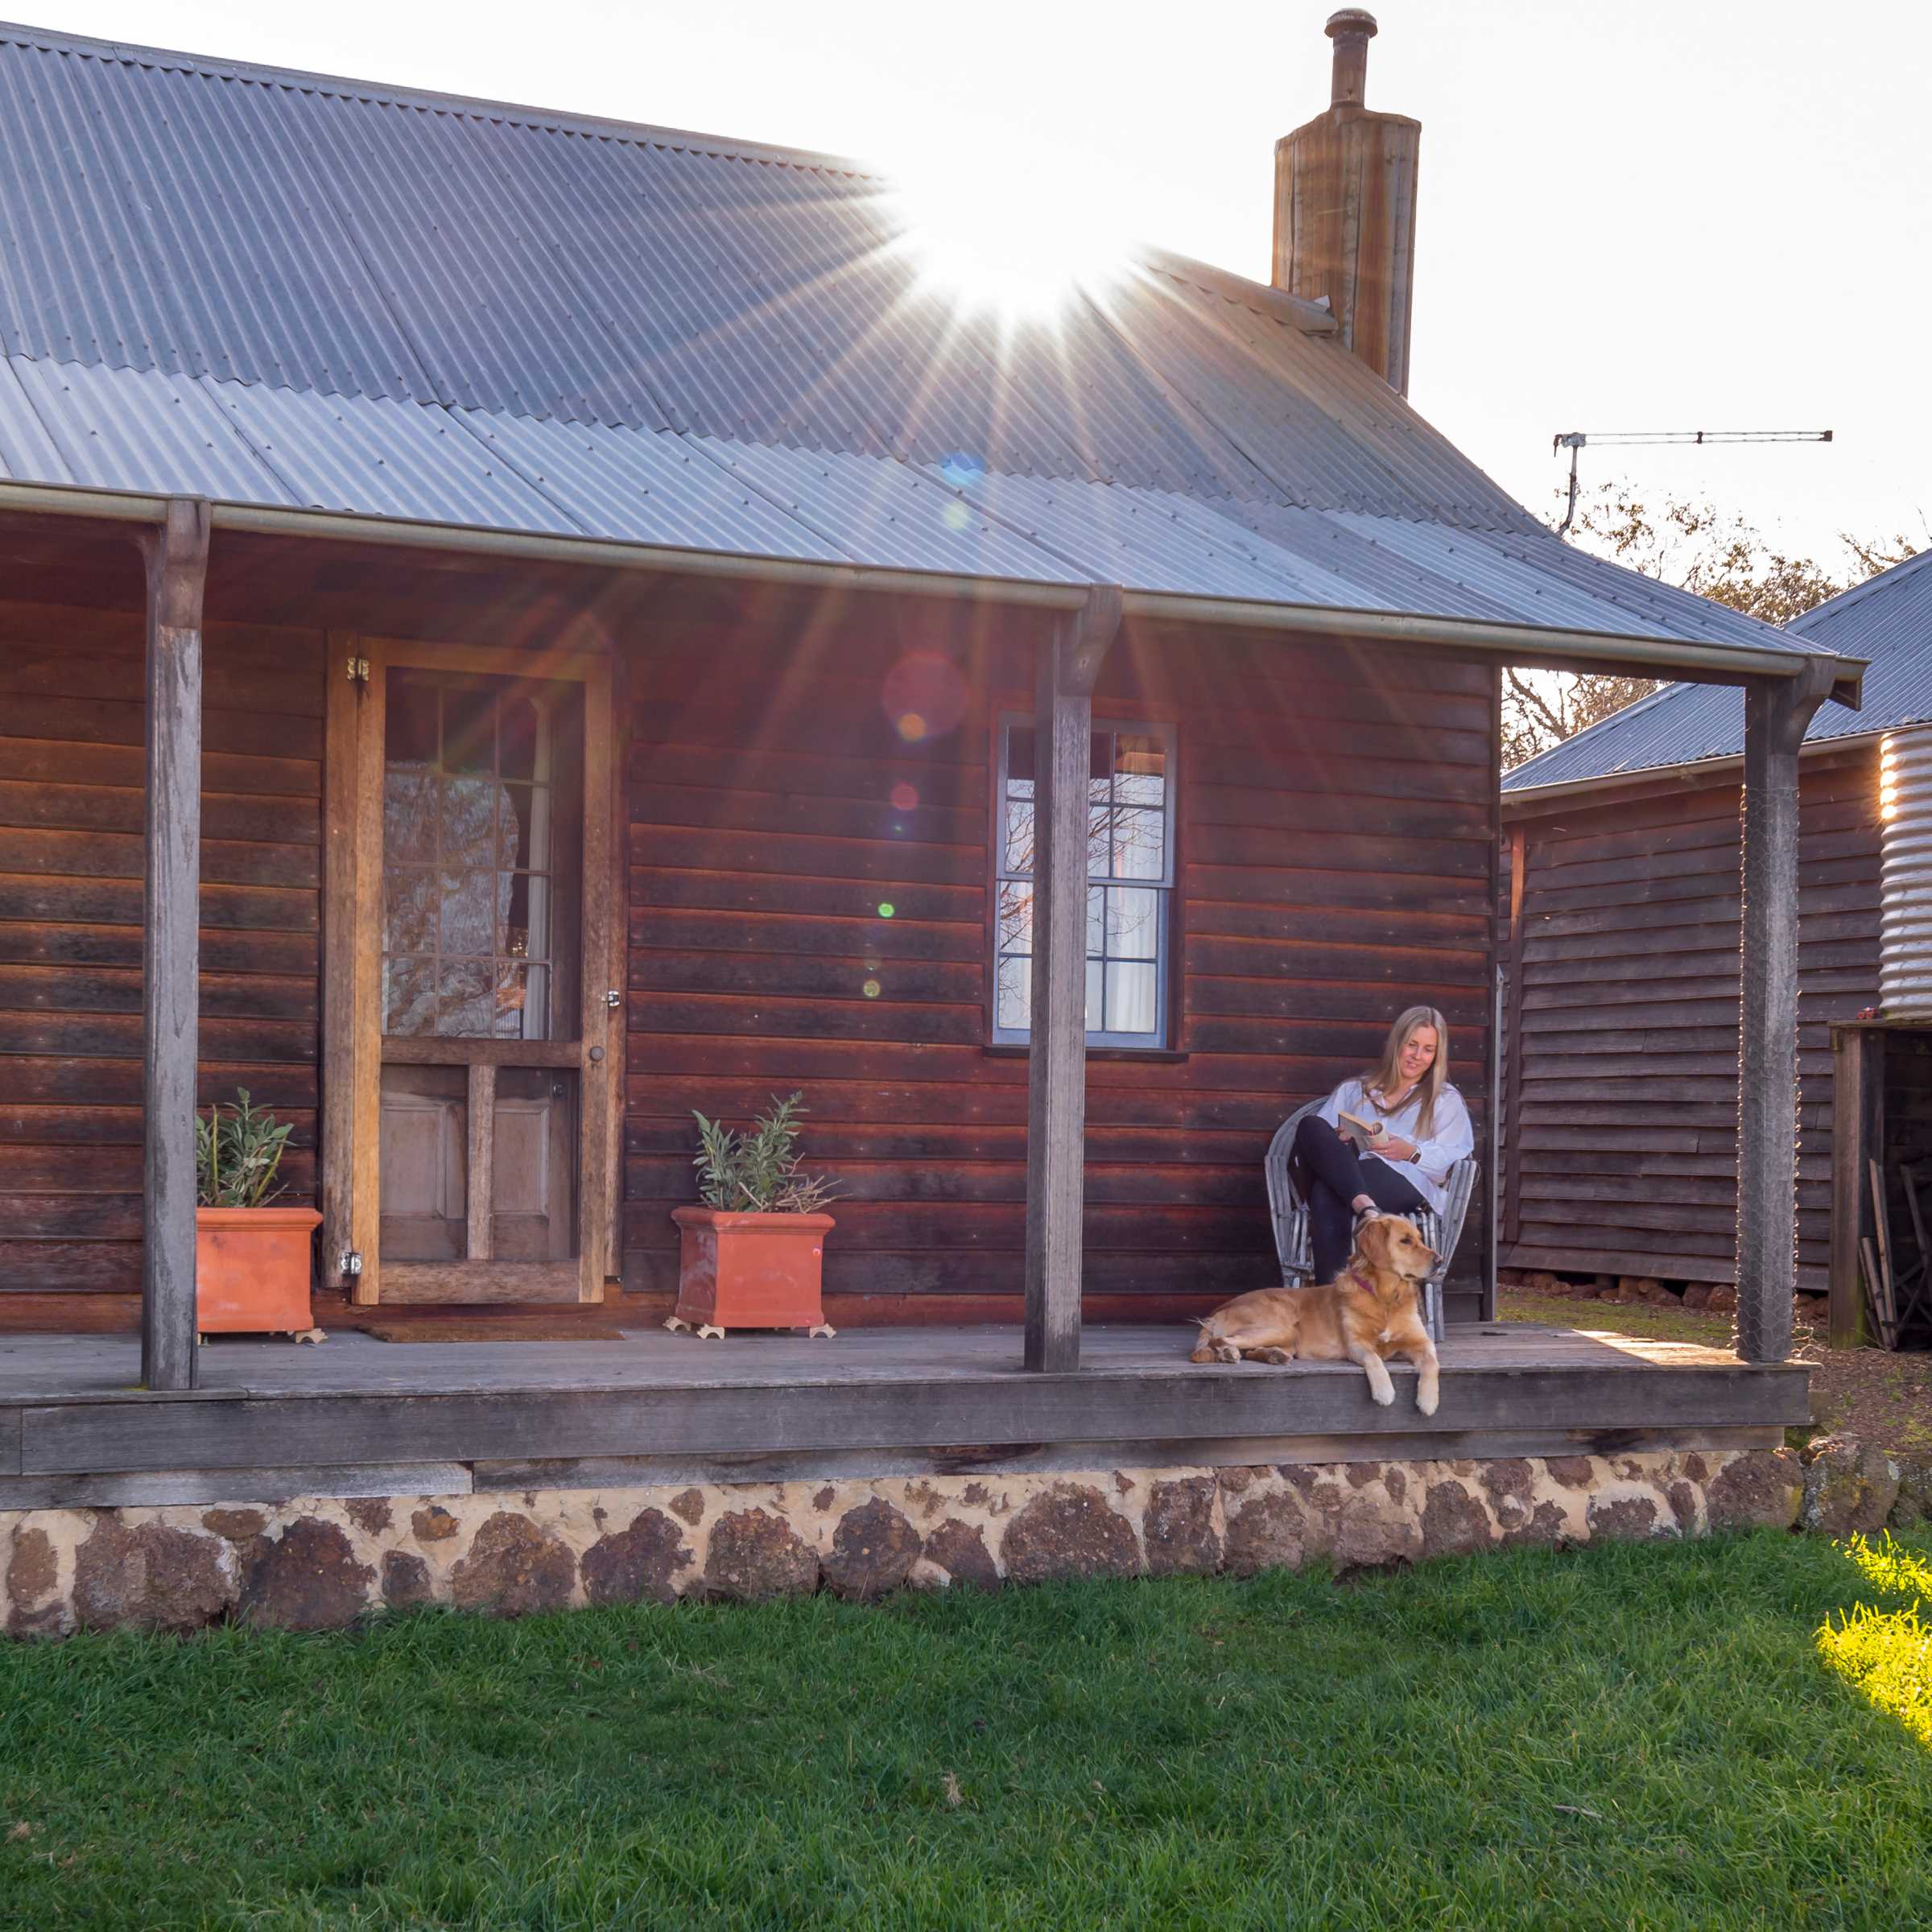 The external verandah of Pumpkin cottage has timber posts and horizontal weatherboard walls. Two windows and a timber front door with two square terracotta pots on either side A chimney stands to the right of the corrugated iron roof. A lady is sitting in a chair with a golden retriever. A shaft of sunlight is shining through a gap beside the cottage on to the grass. Photo: Rob Burnett.